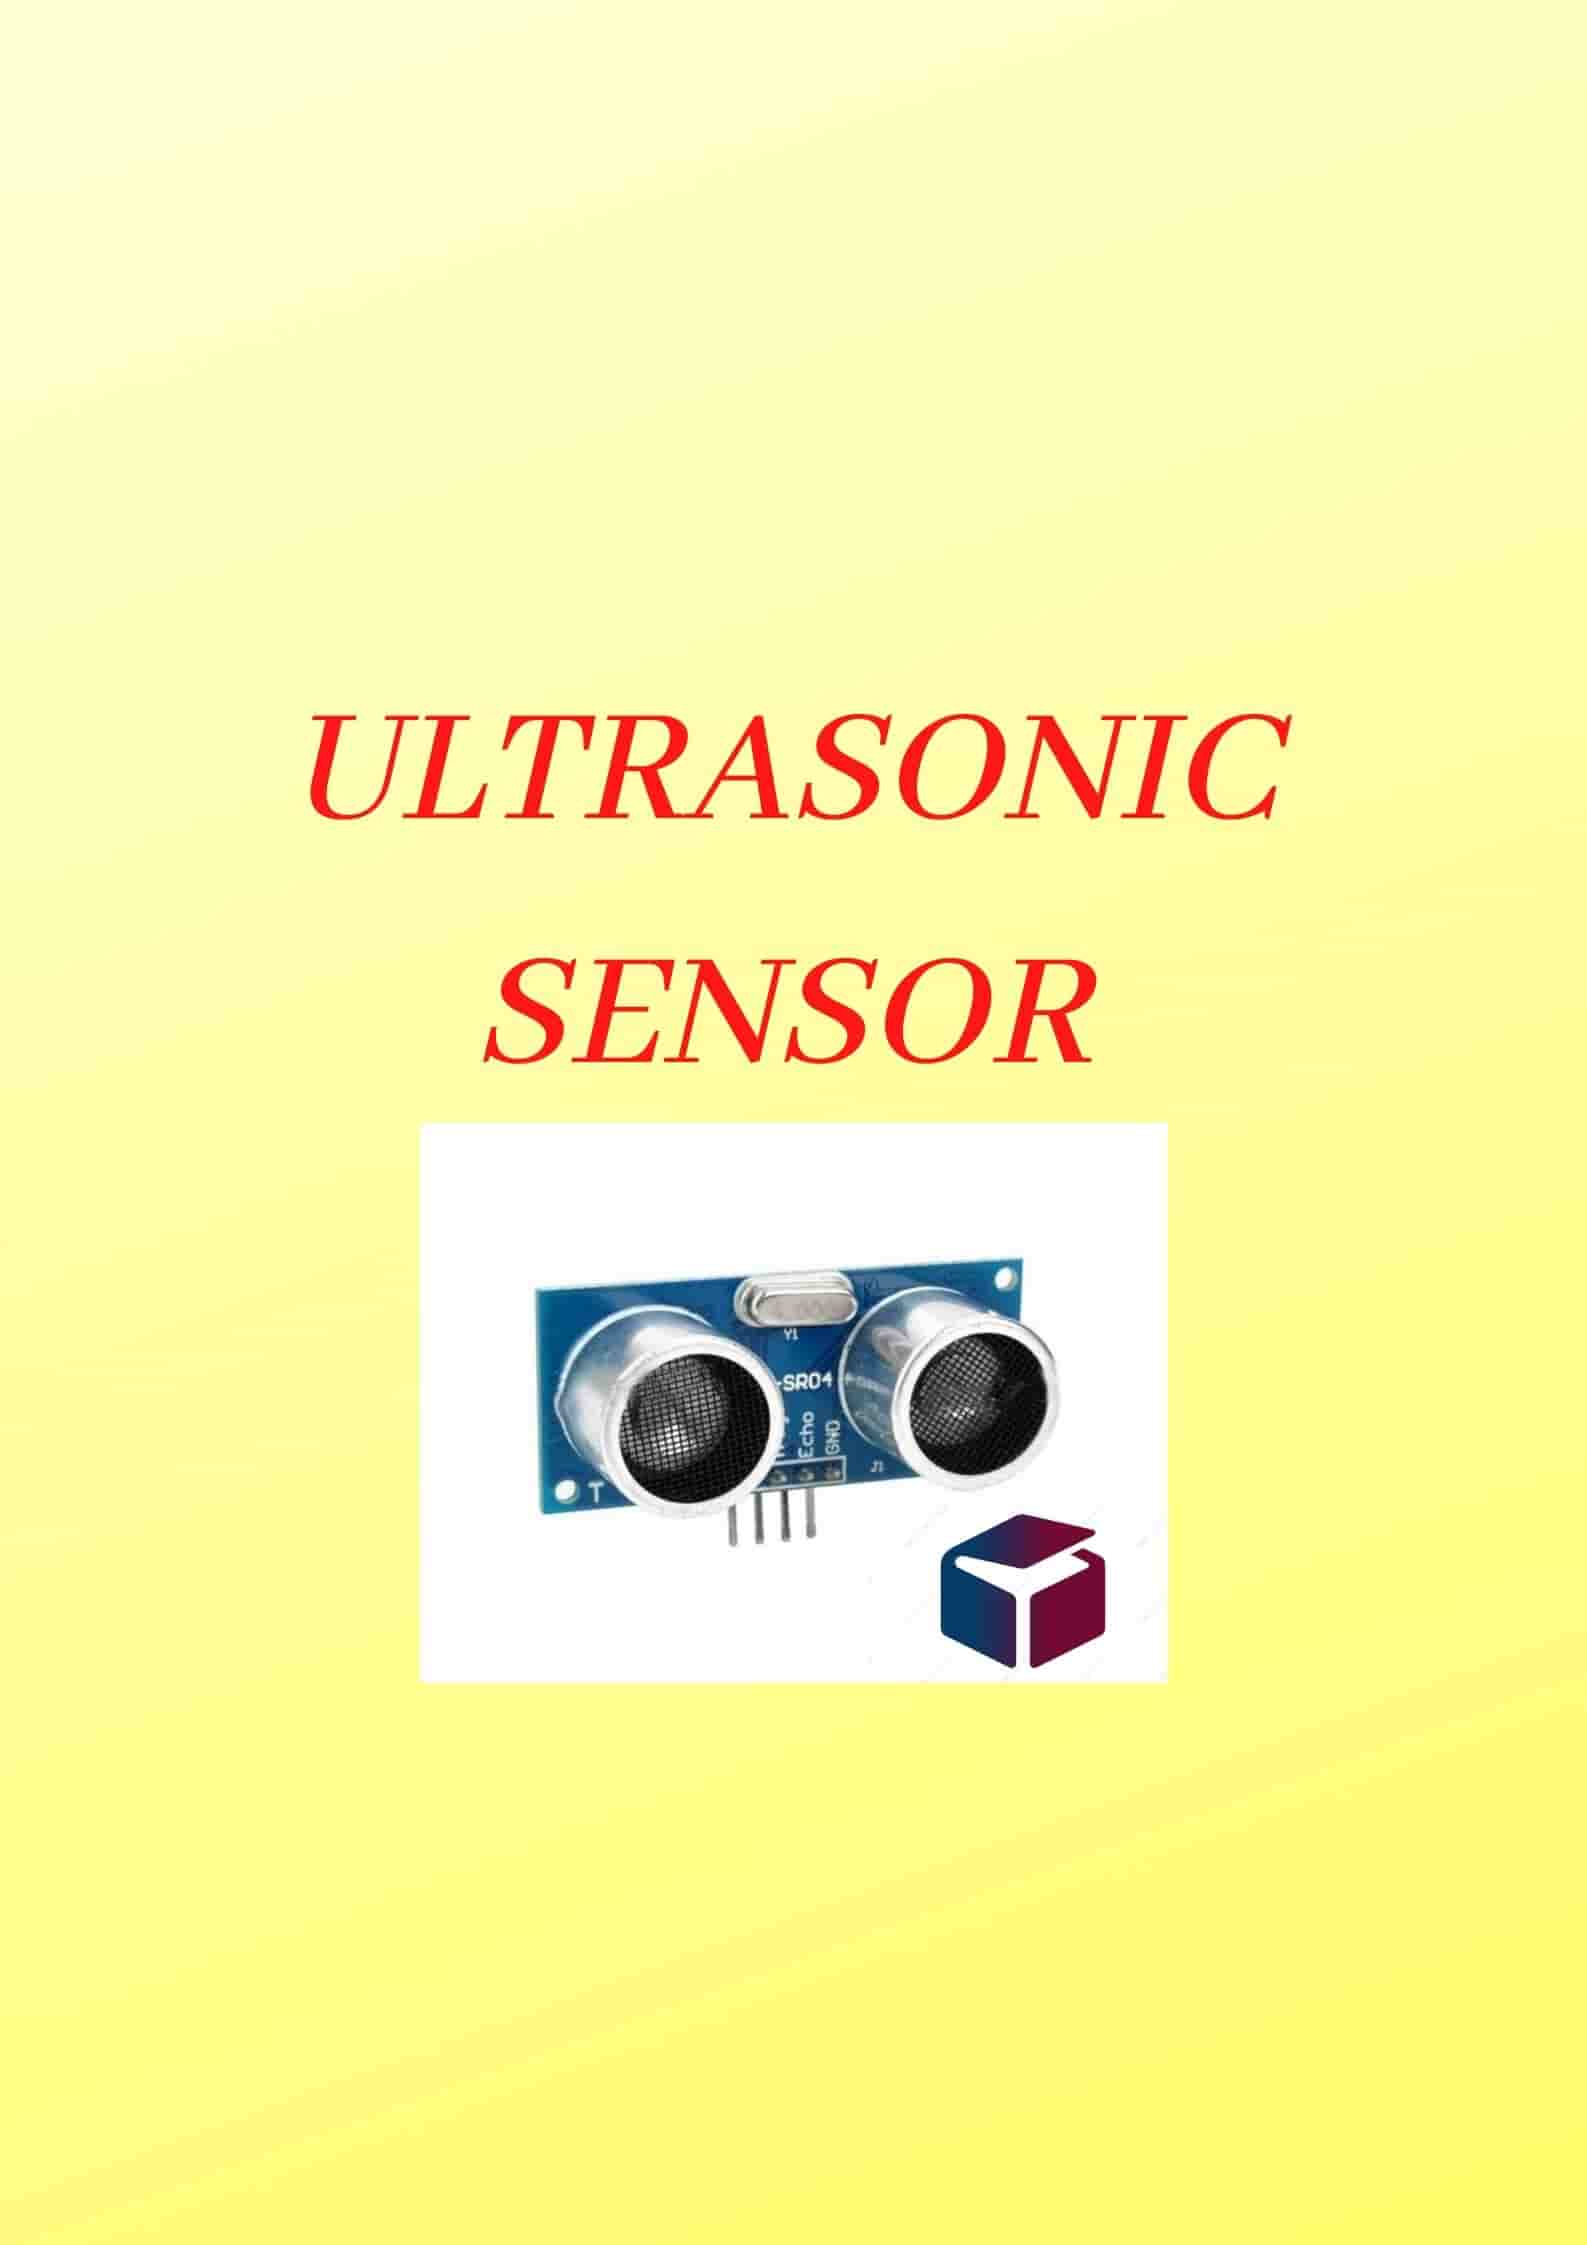 Ultrasonic sensor working- How and when to use